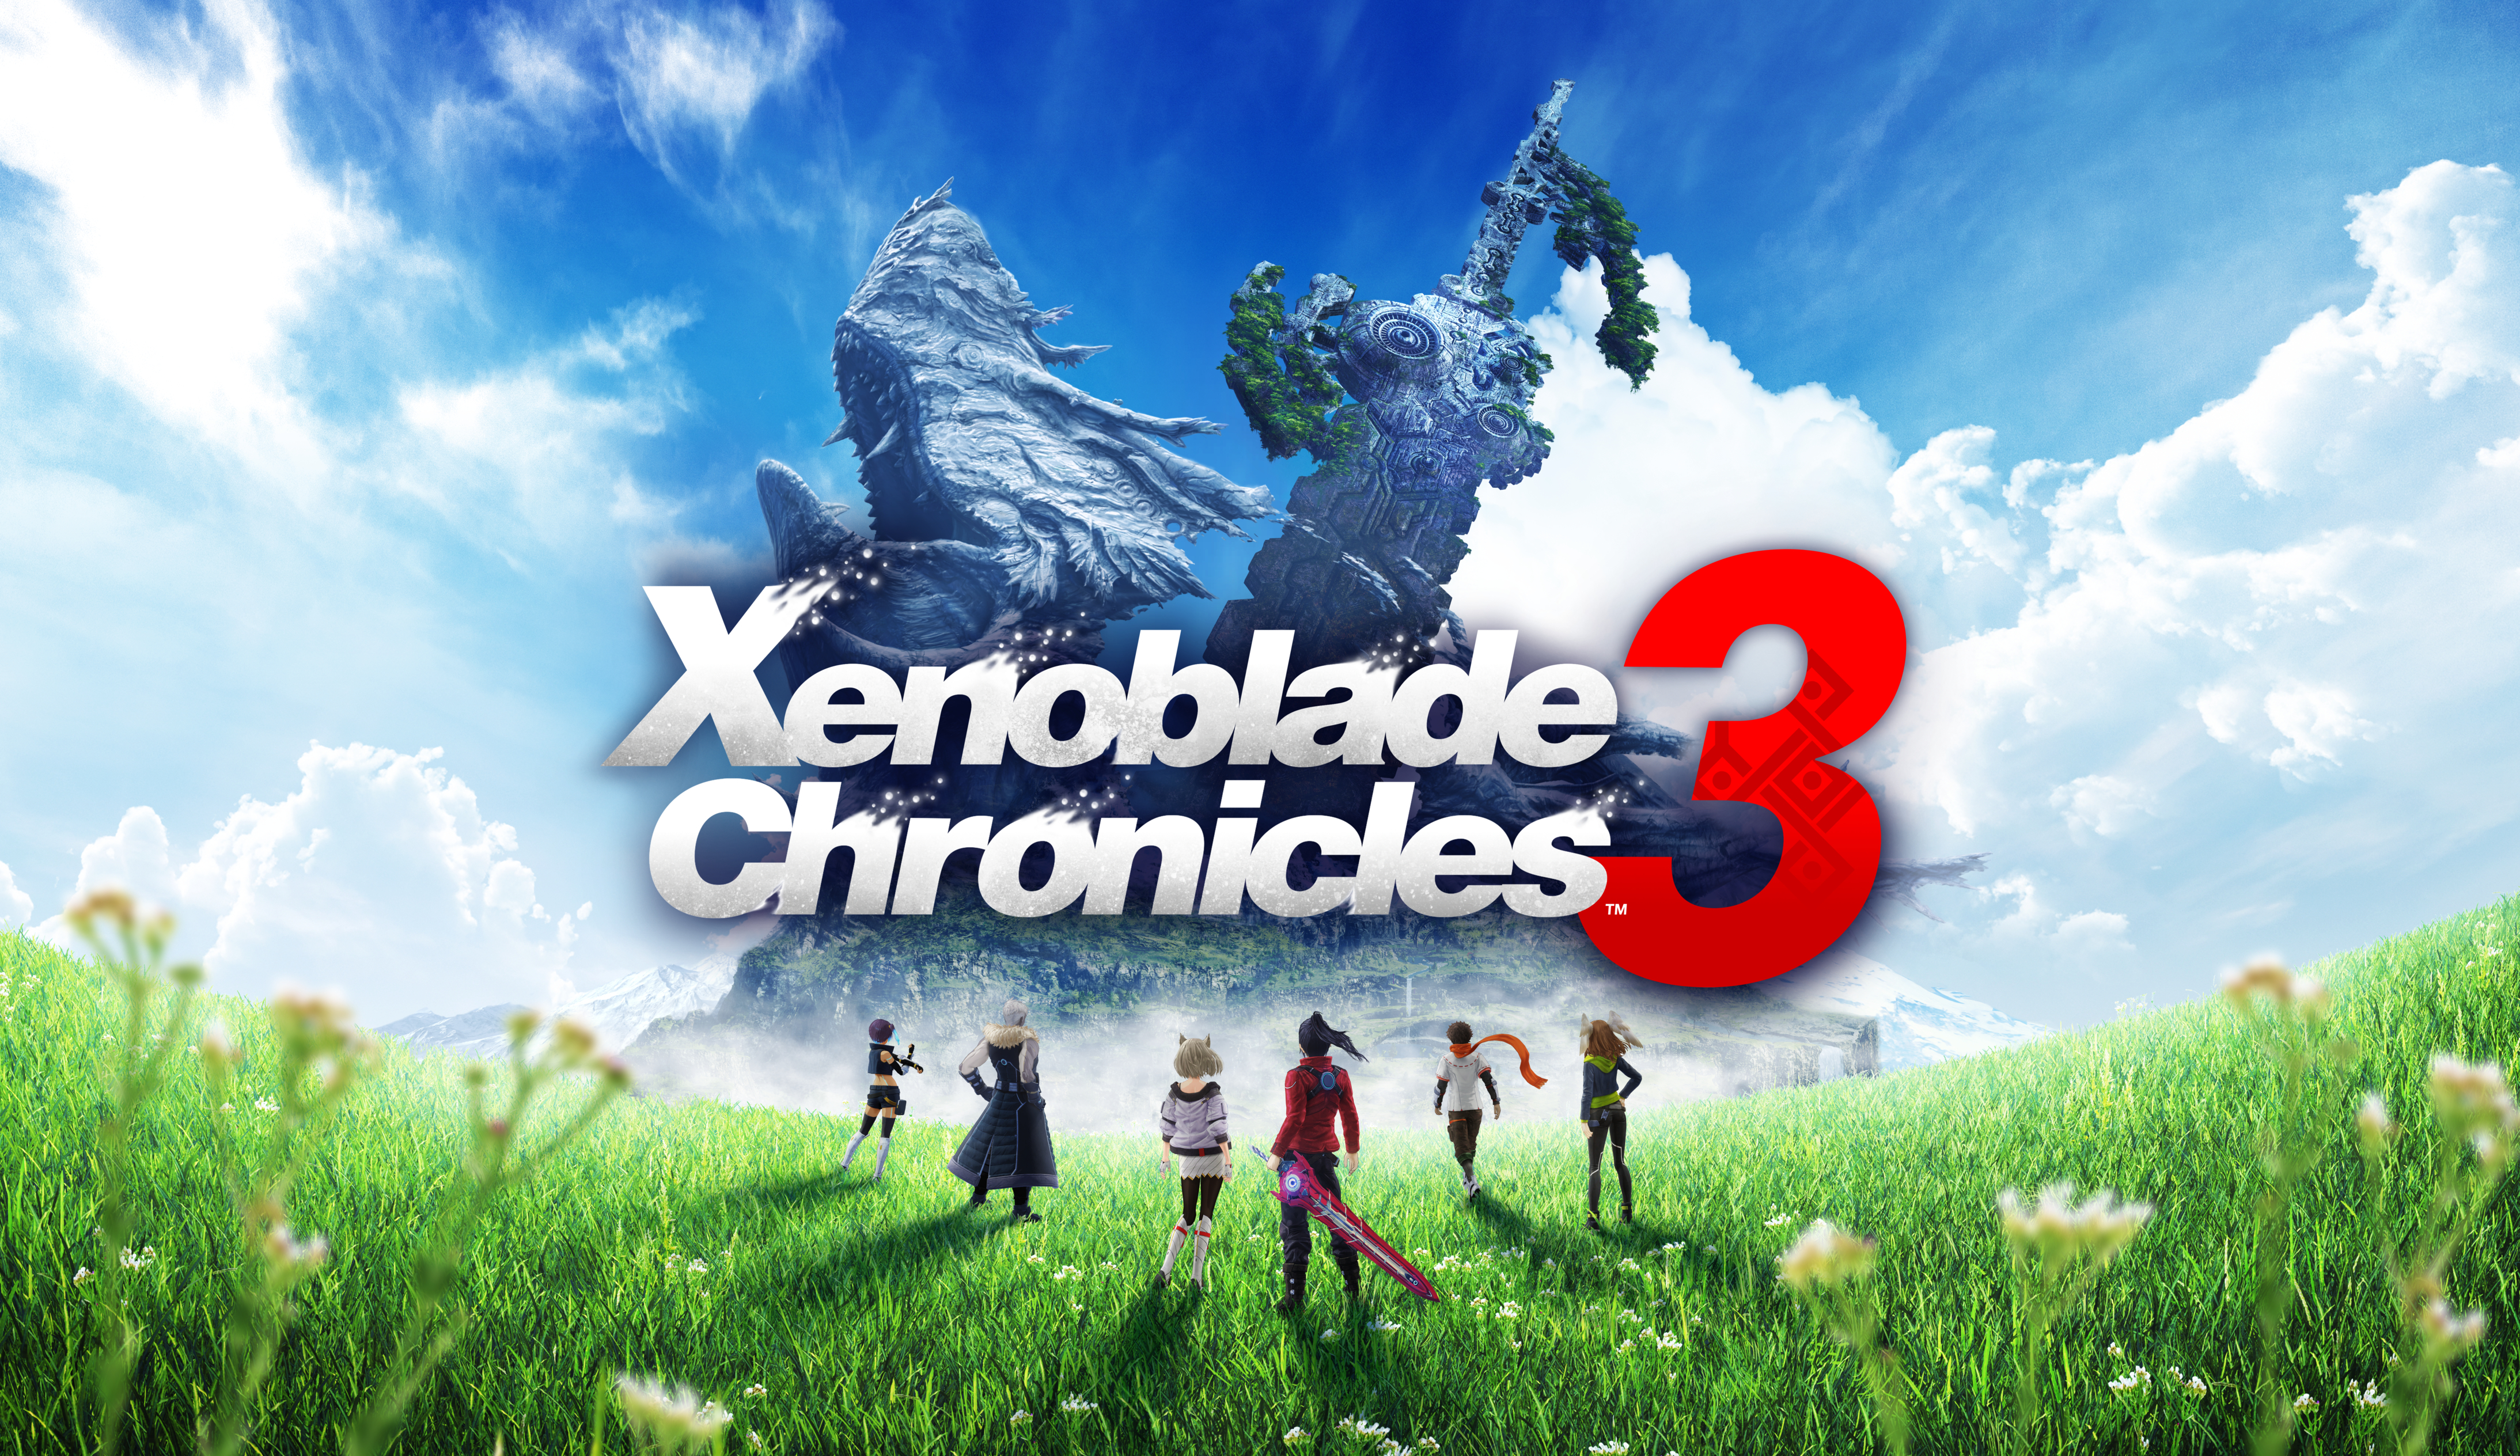 HD xenoblade chronicles 3 wallpapers  Peakpx